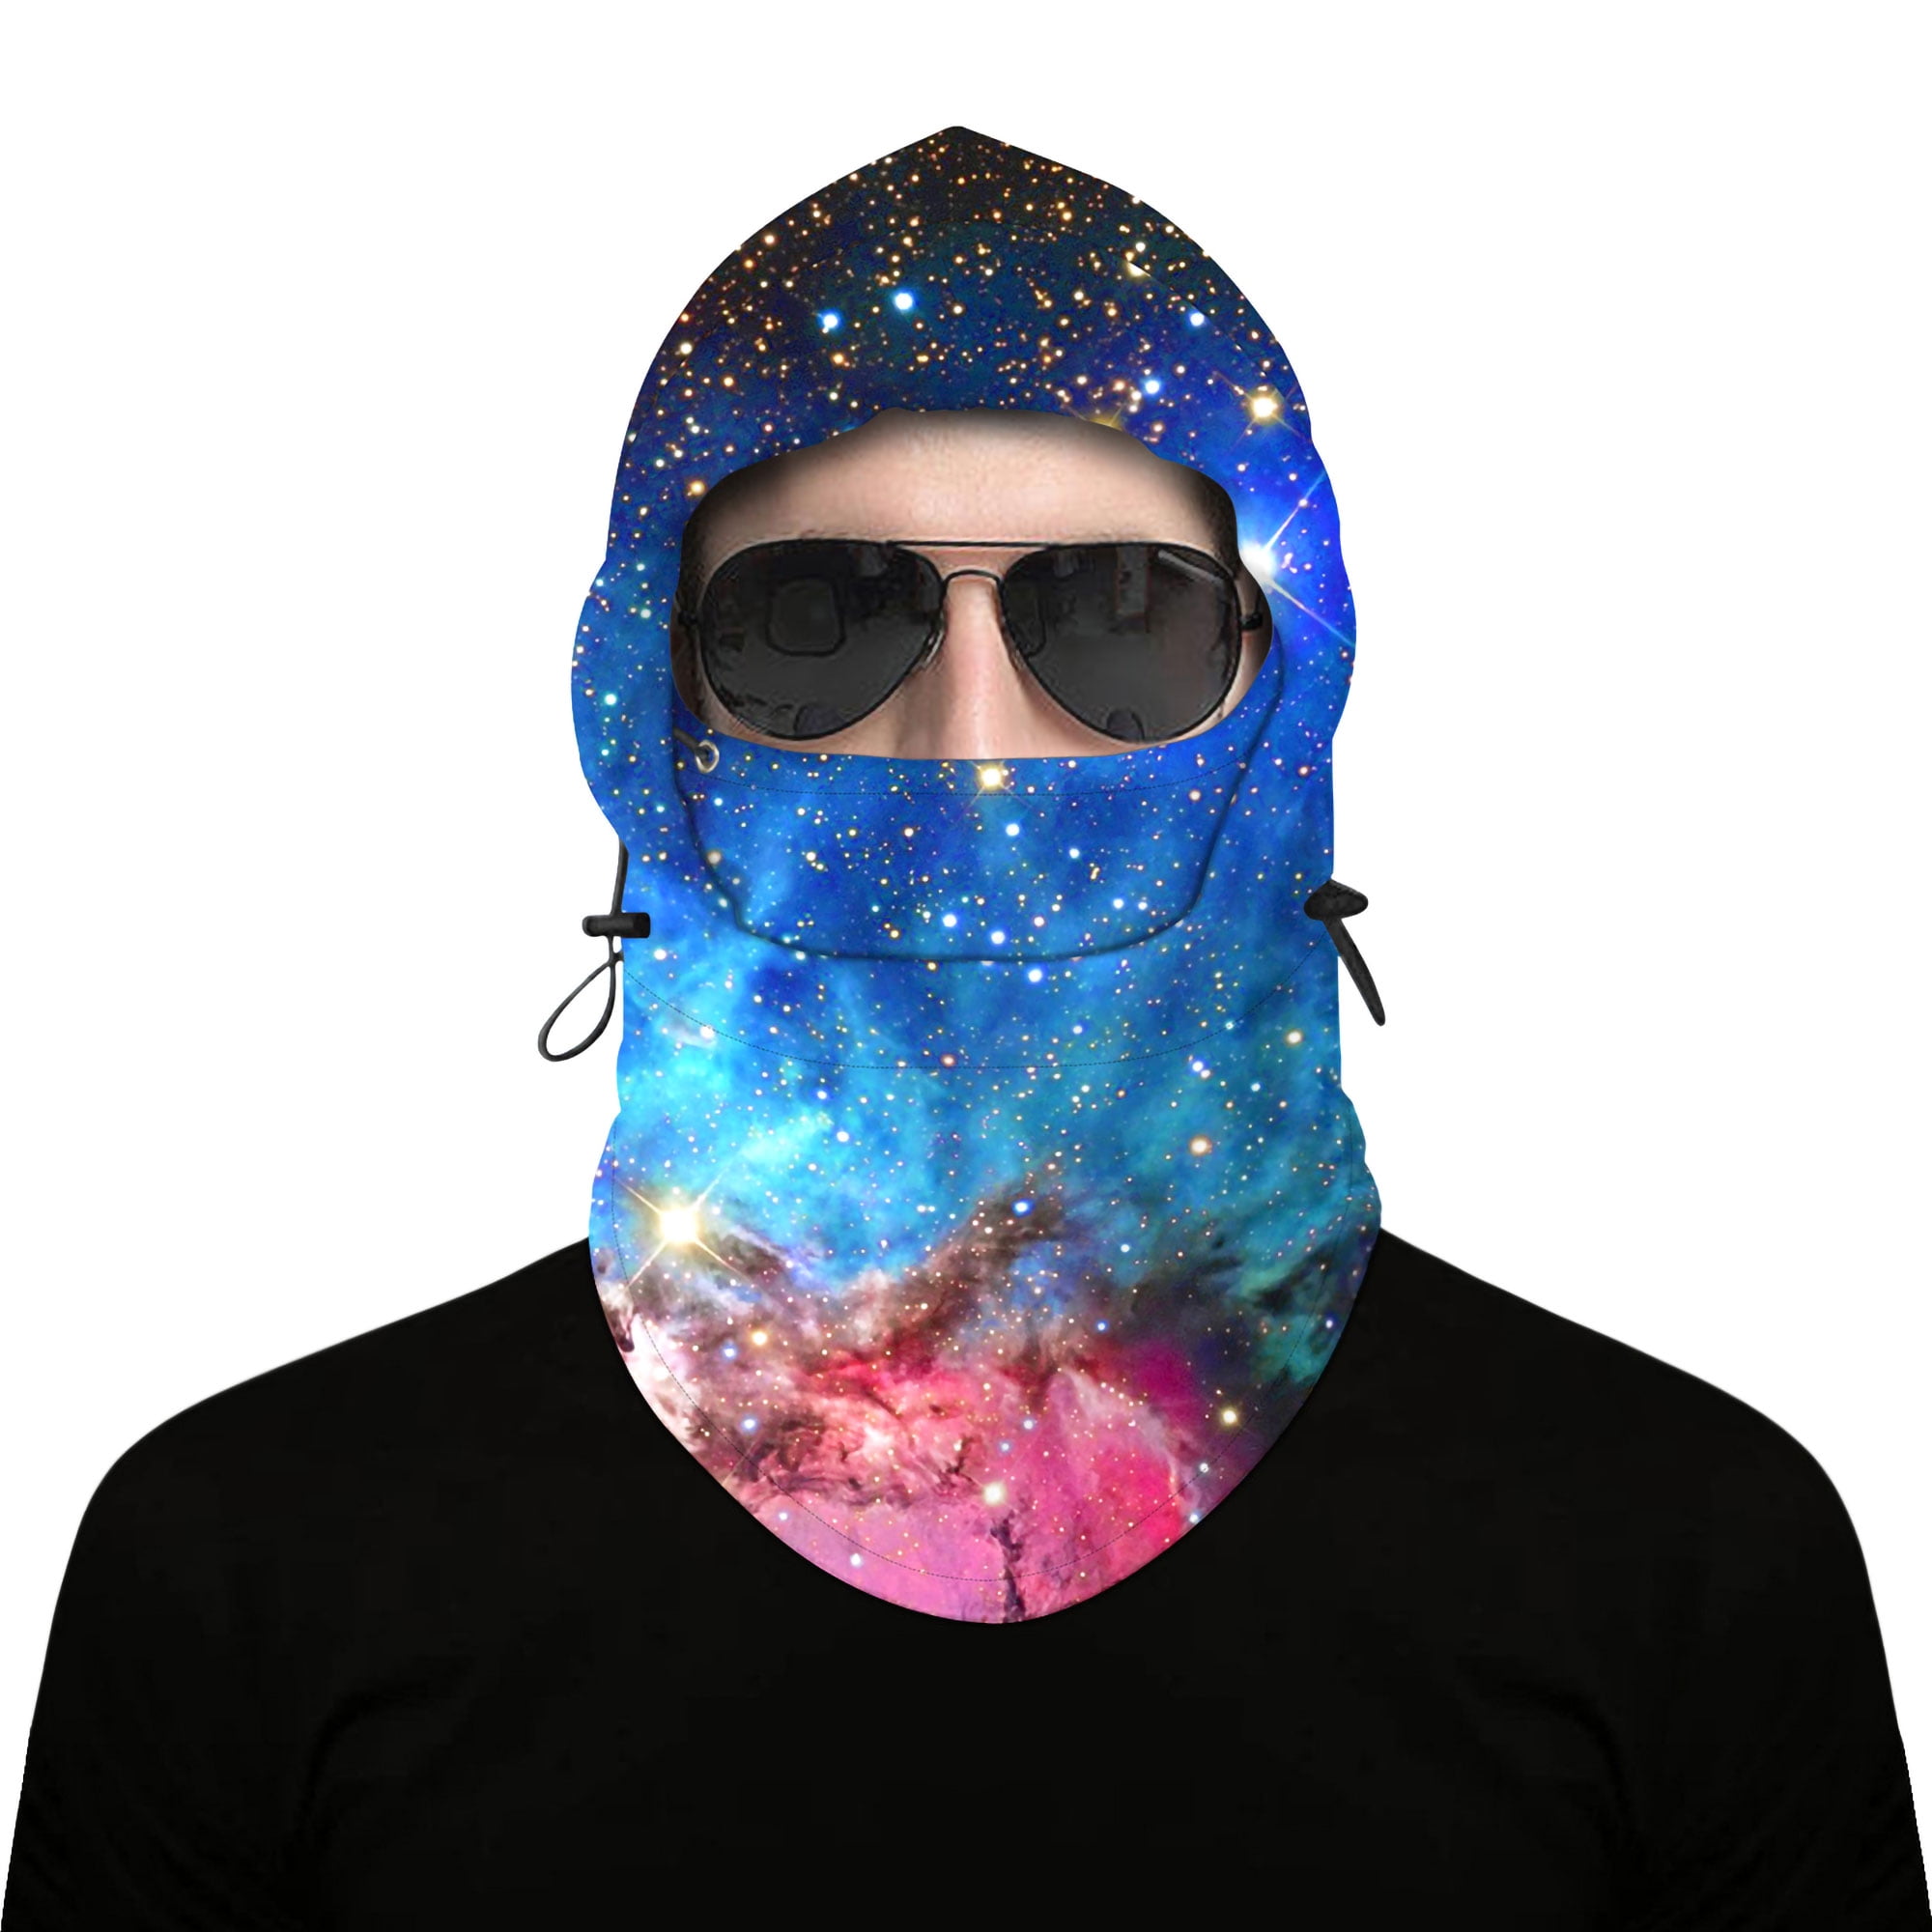 Details about   Windproof Balaclava Ski Full Face Mask Motorcycle Cycling Hood Hat Neck Gaiter 